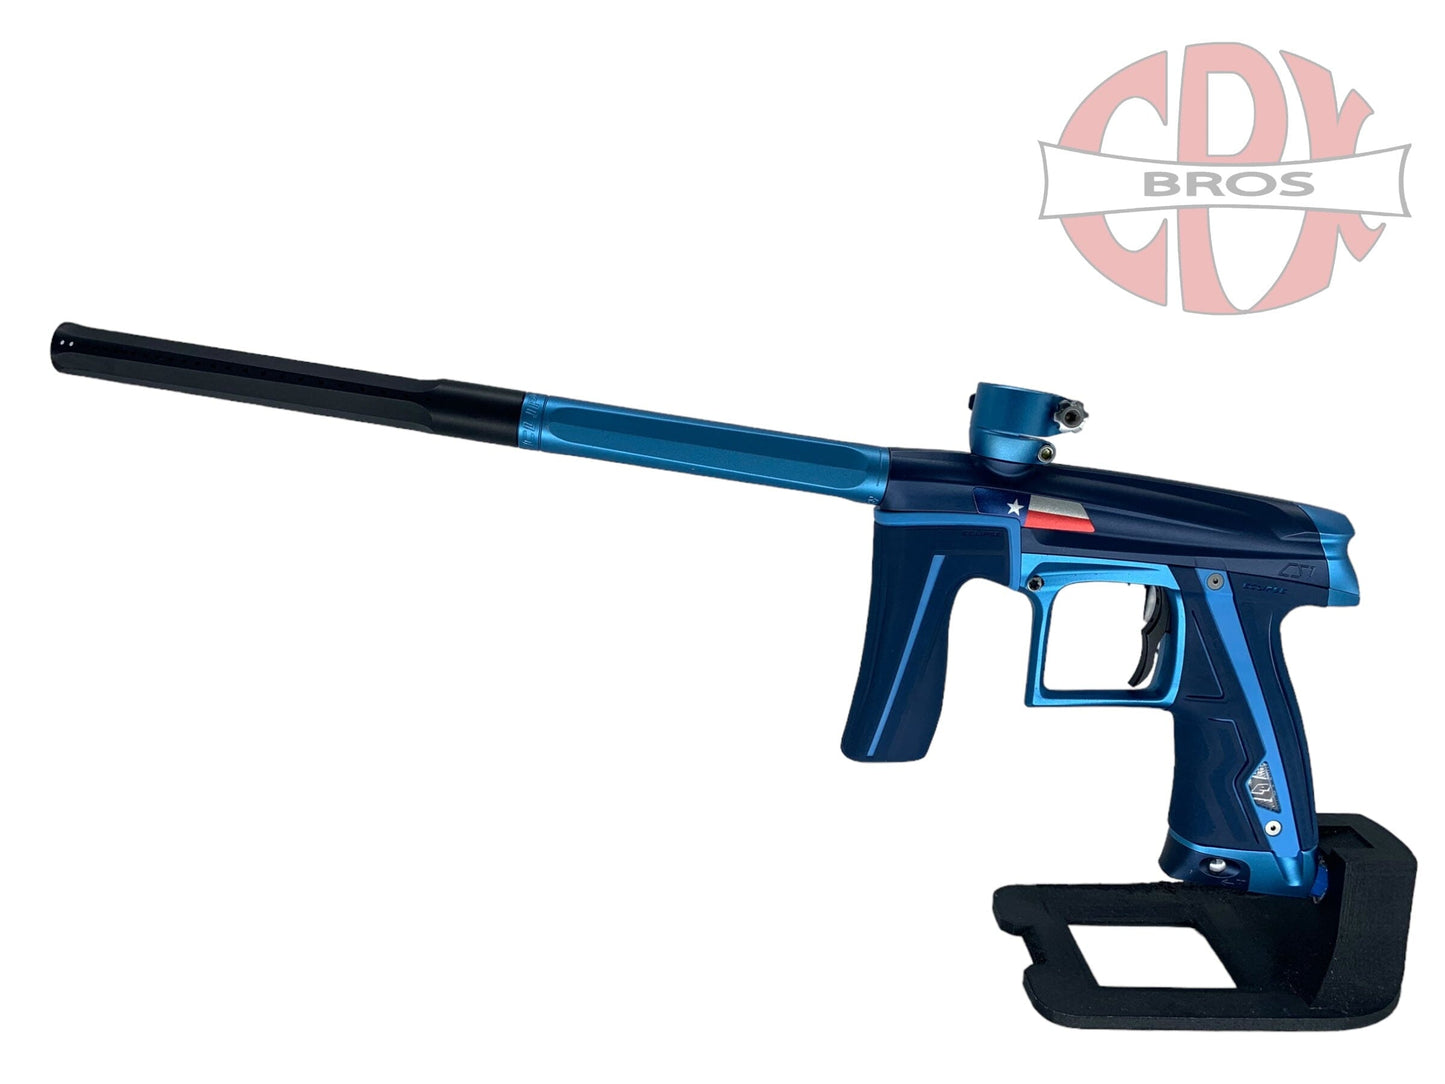 Used Planet Eclipse Cs1 Paintball Gun Paintball Gun from CPXBrosPaintball Buy/Sell/Trade Paintball Markers, New Paintball Guns, Paintball Hoppers, Paintball Masks, and Hormesis Headbands